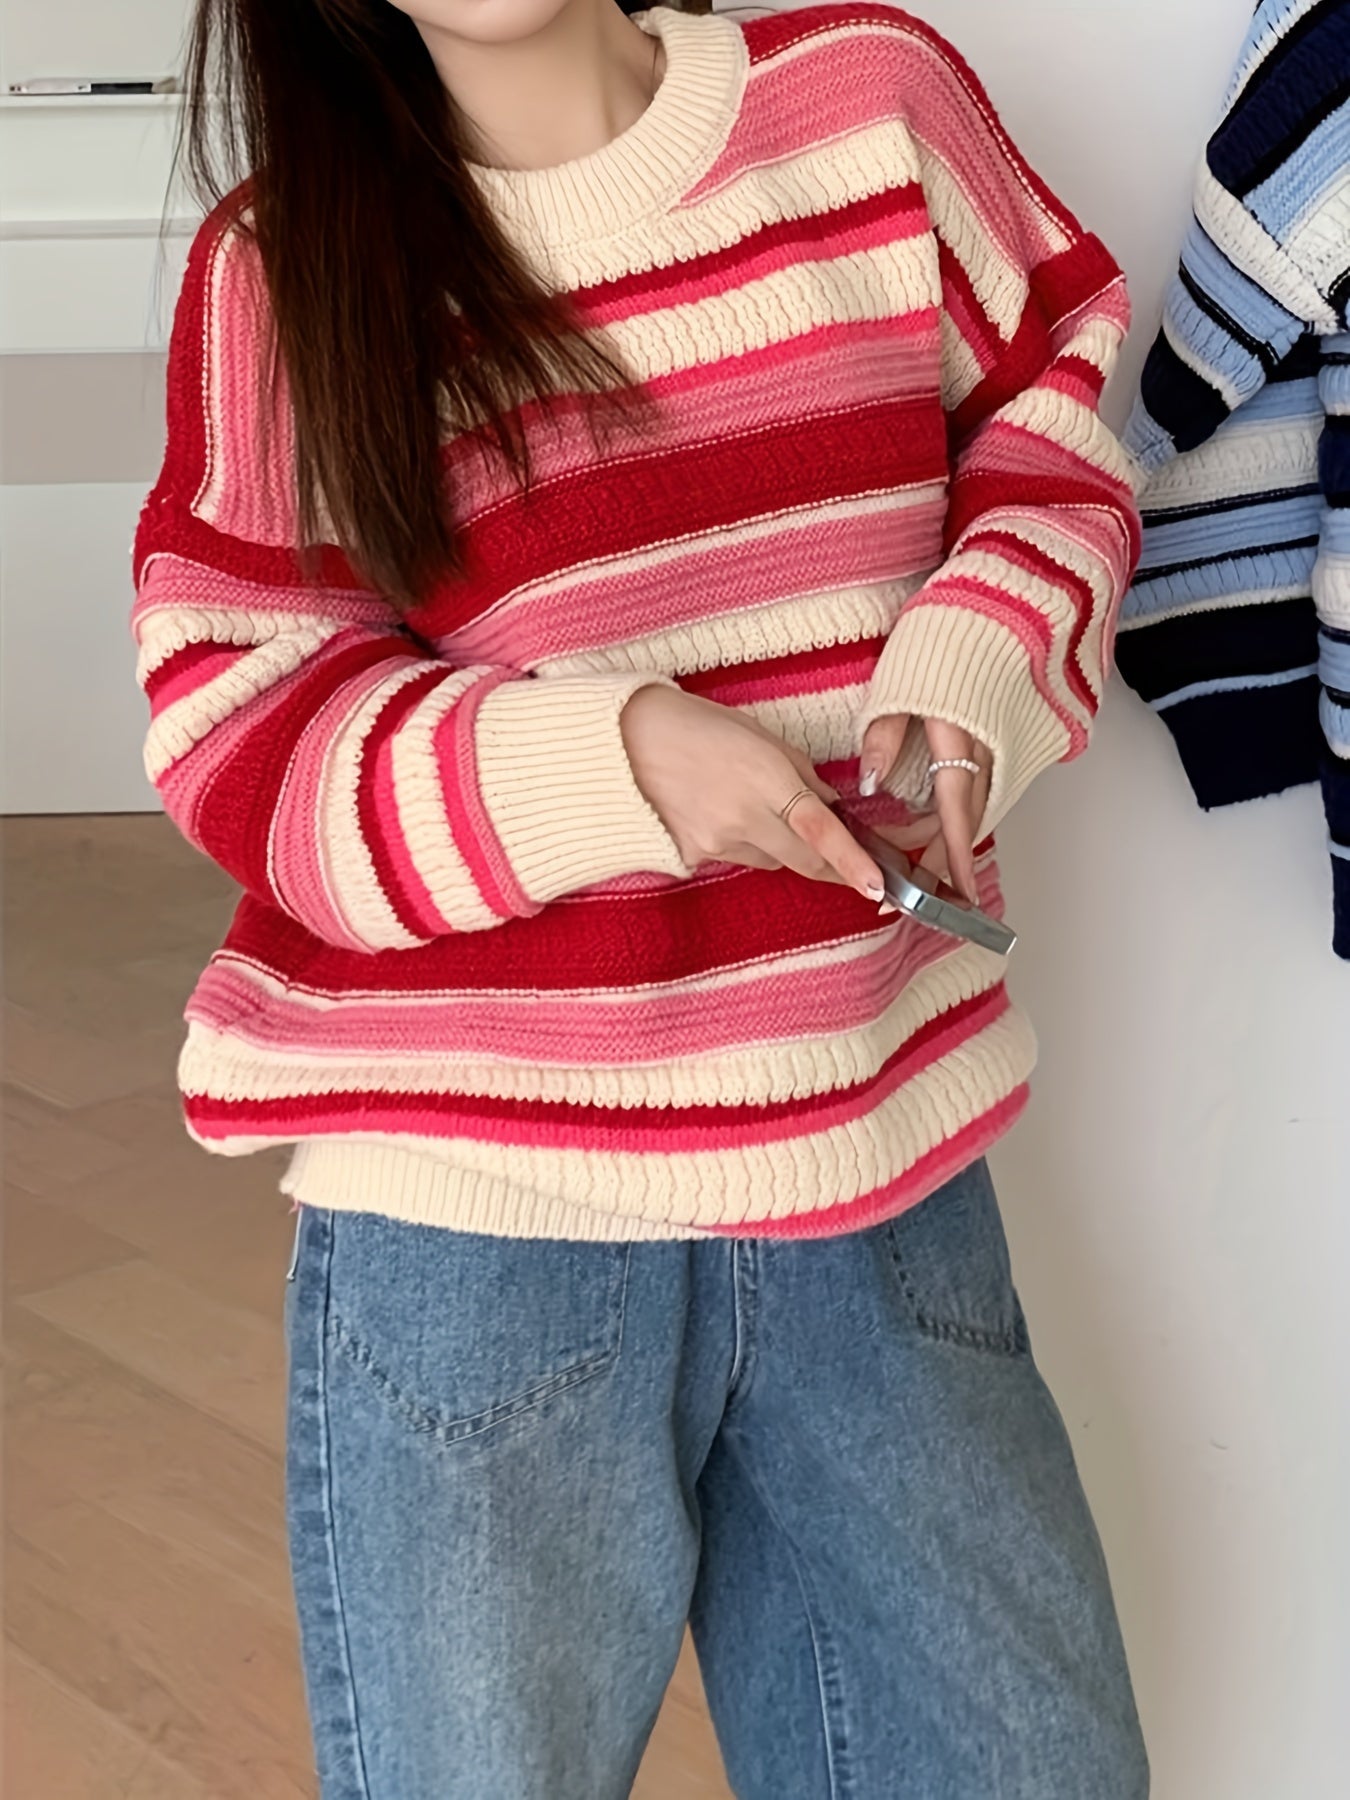 Antmvs Color Block Knitted Pullover Sweater, Casual Long Sleeve Sweater For Fall & Winter, Women's Clothing